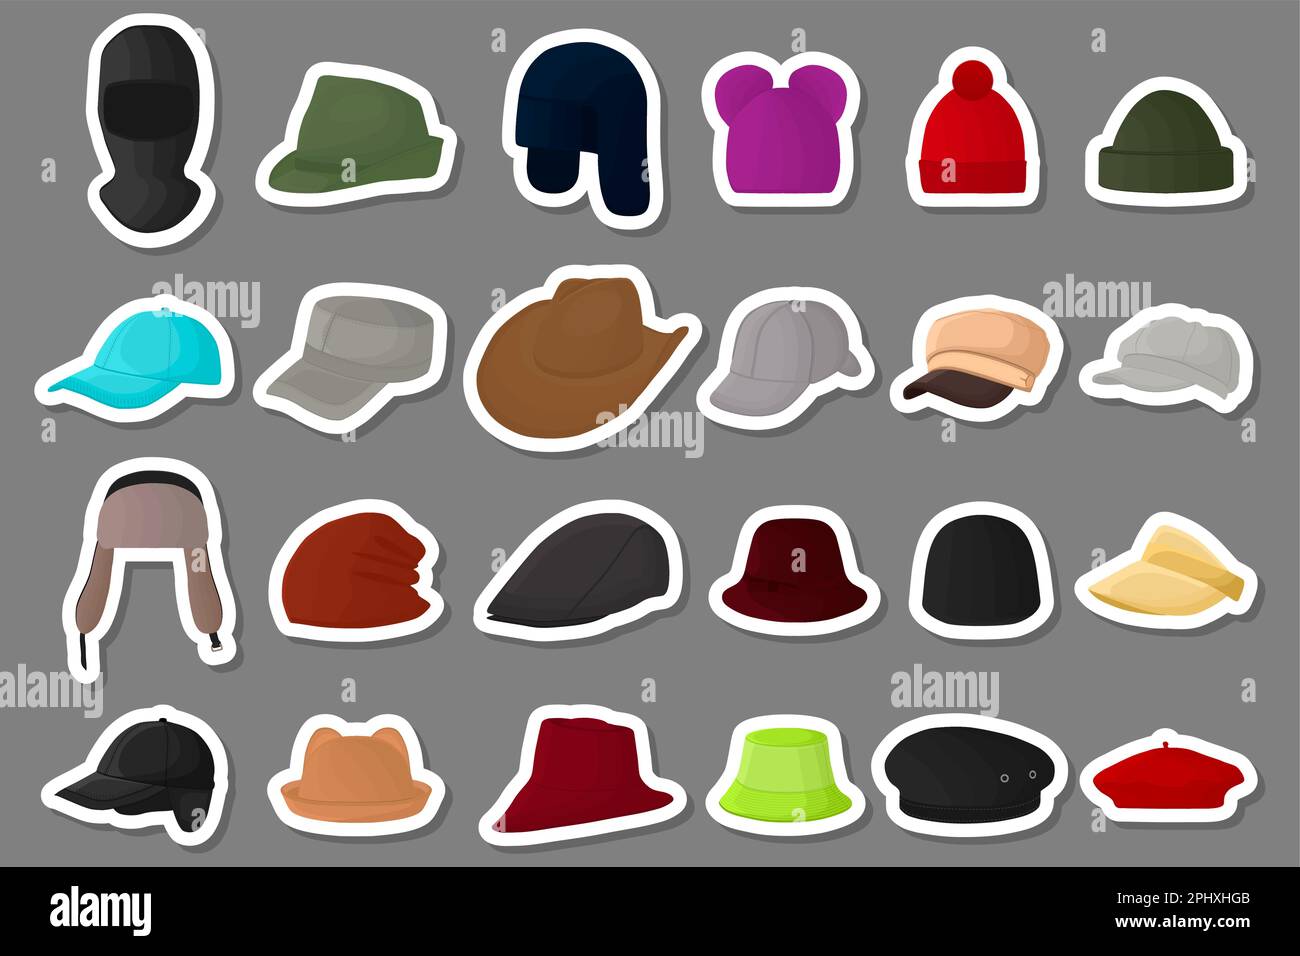 Illustration on theme big kit different types hats, beautiful caps in white background, caps pattern consisting of collection various hats for wearing Stock Vector